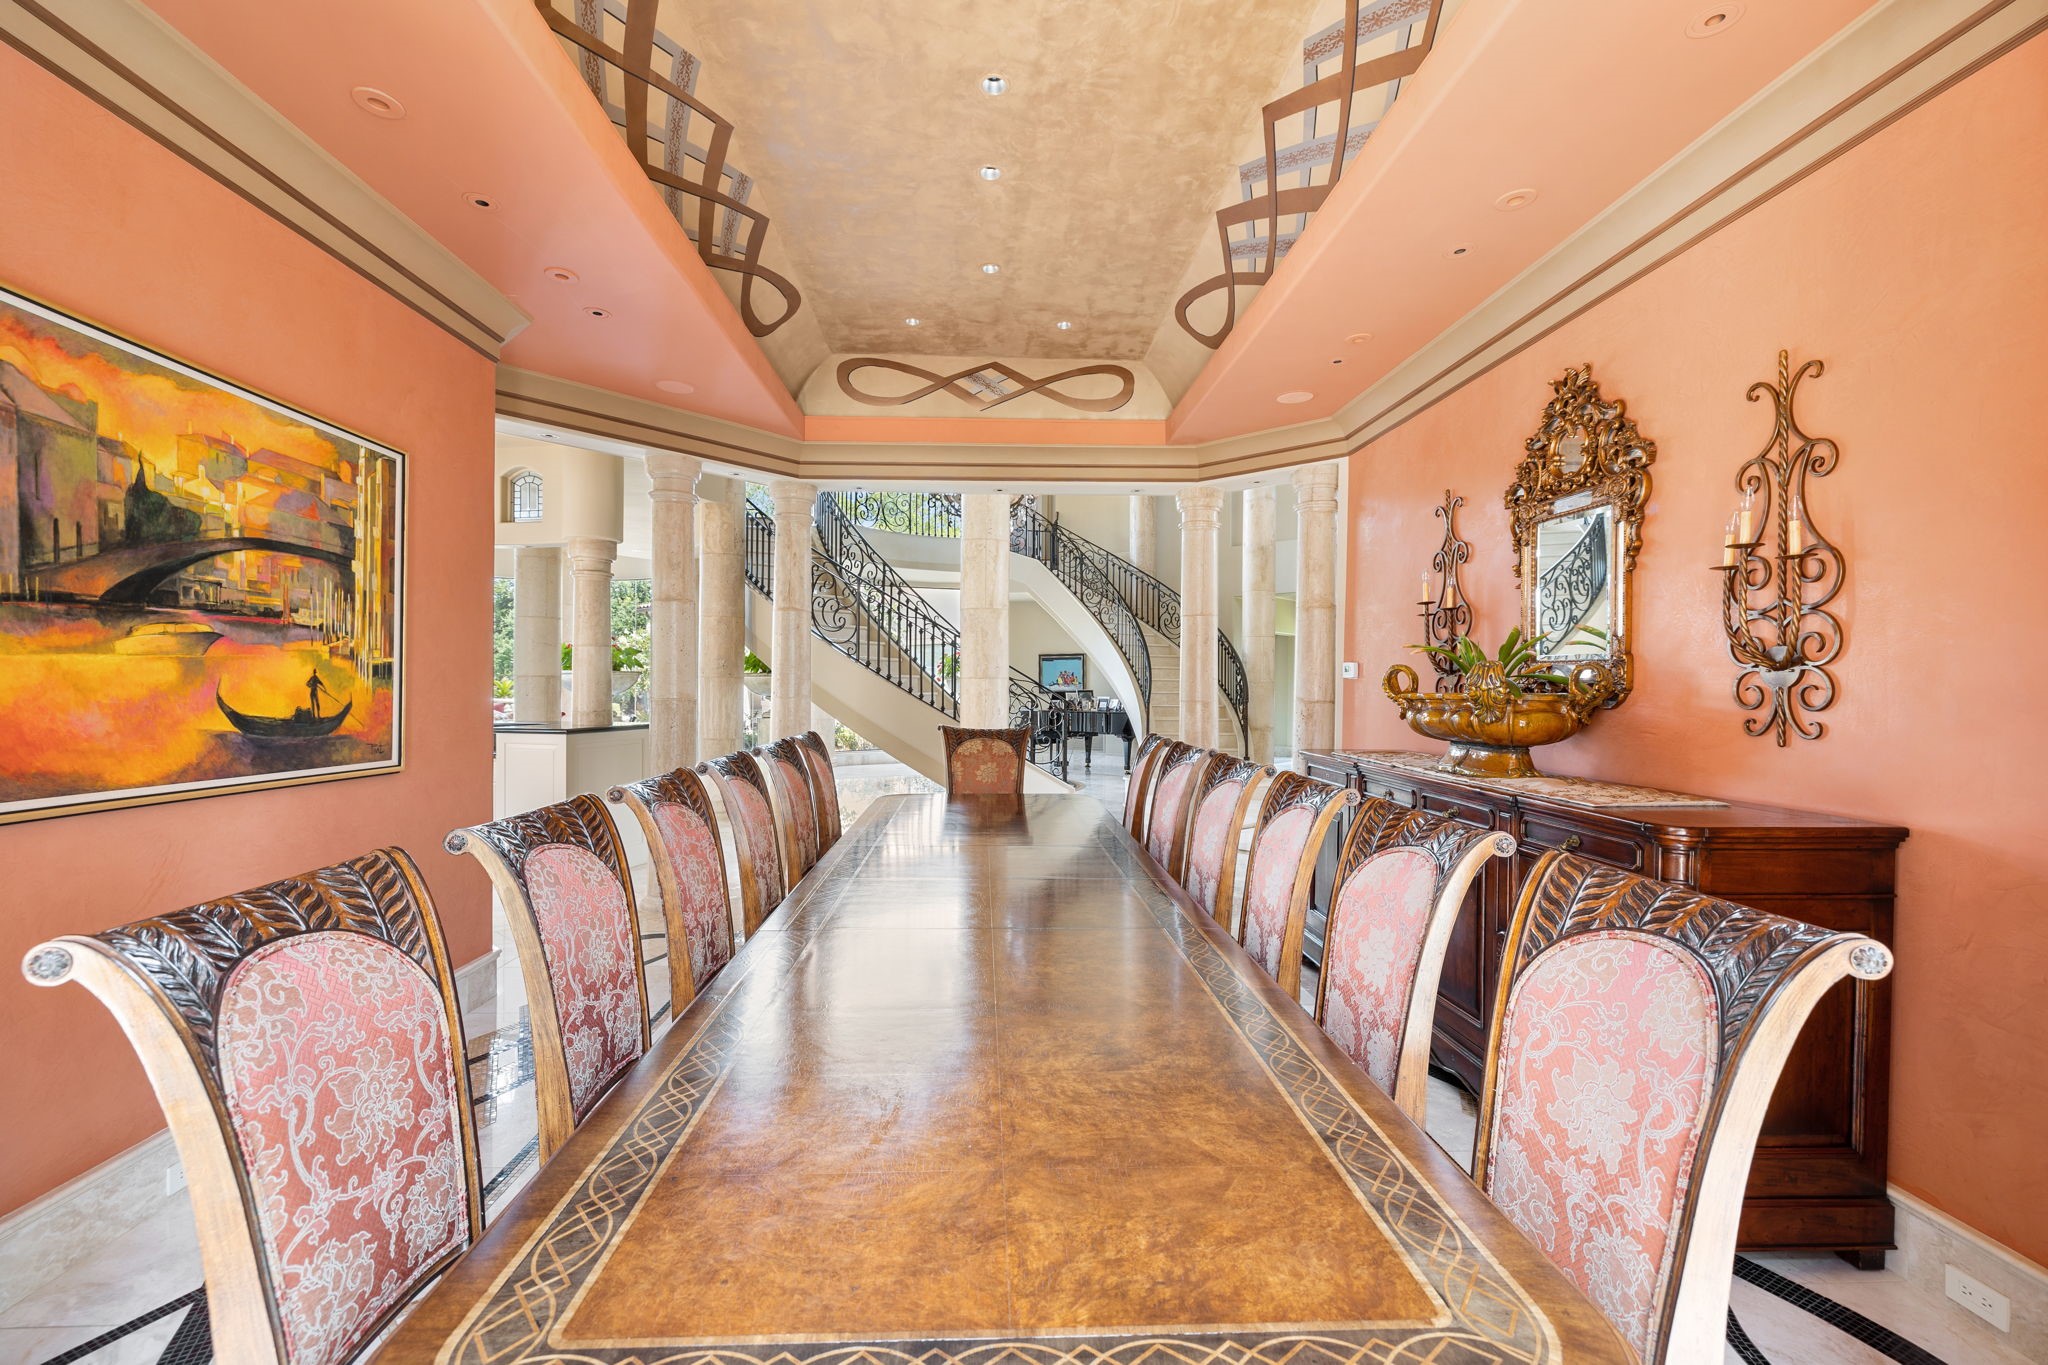 Just off a second axis of the Grand Entry is the Dining Salon, perfect for entertaining, as up to twenty guests are comfortably seated. The walls are swathed in terra cotta hued Venetian Plaster with Marble floors beneath your feet.  A rectangular cove ceiling is adorned with stencil accents. Off frame behind us is a view of the central Terrazza.